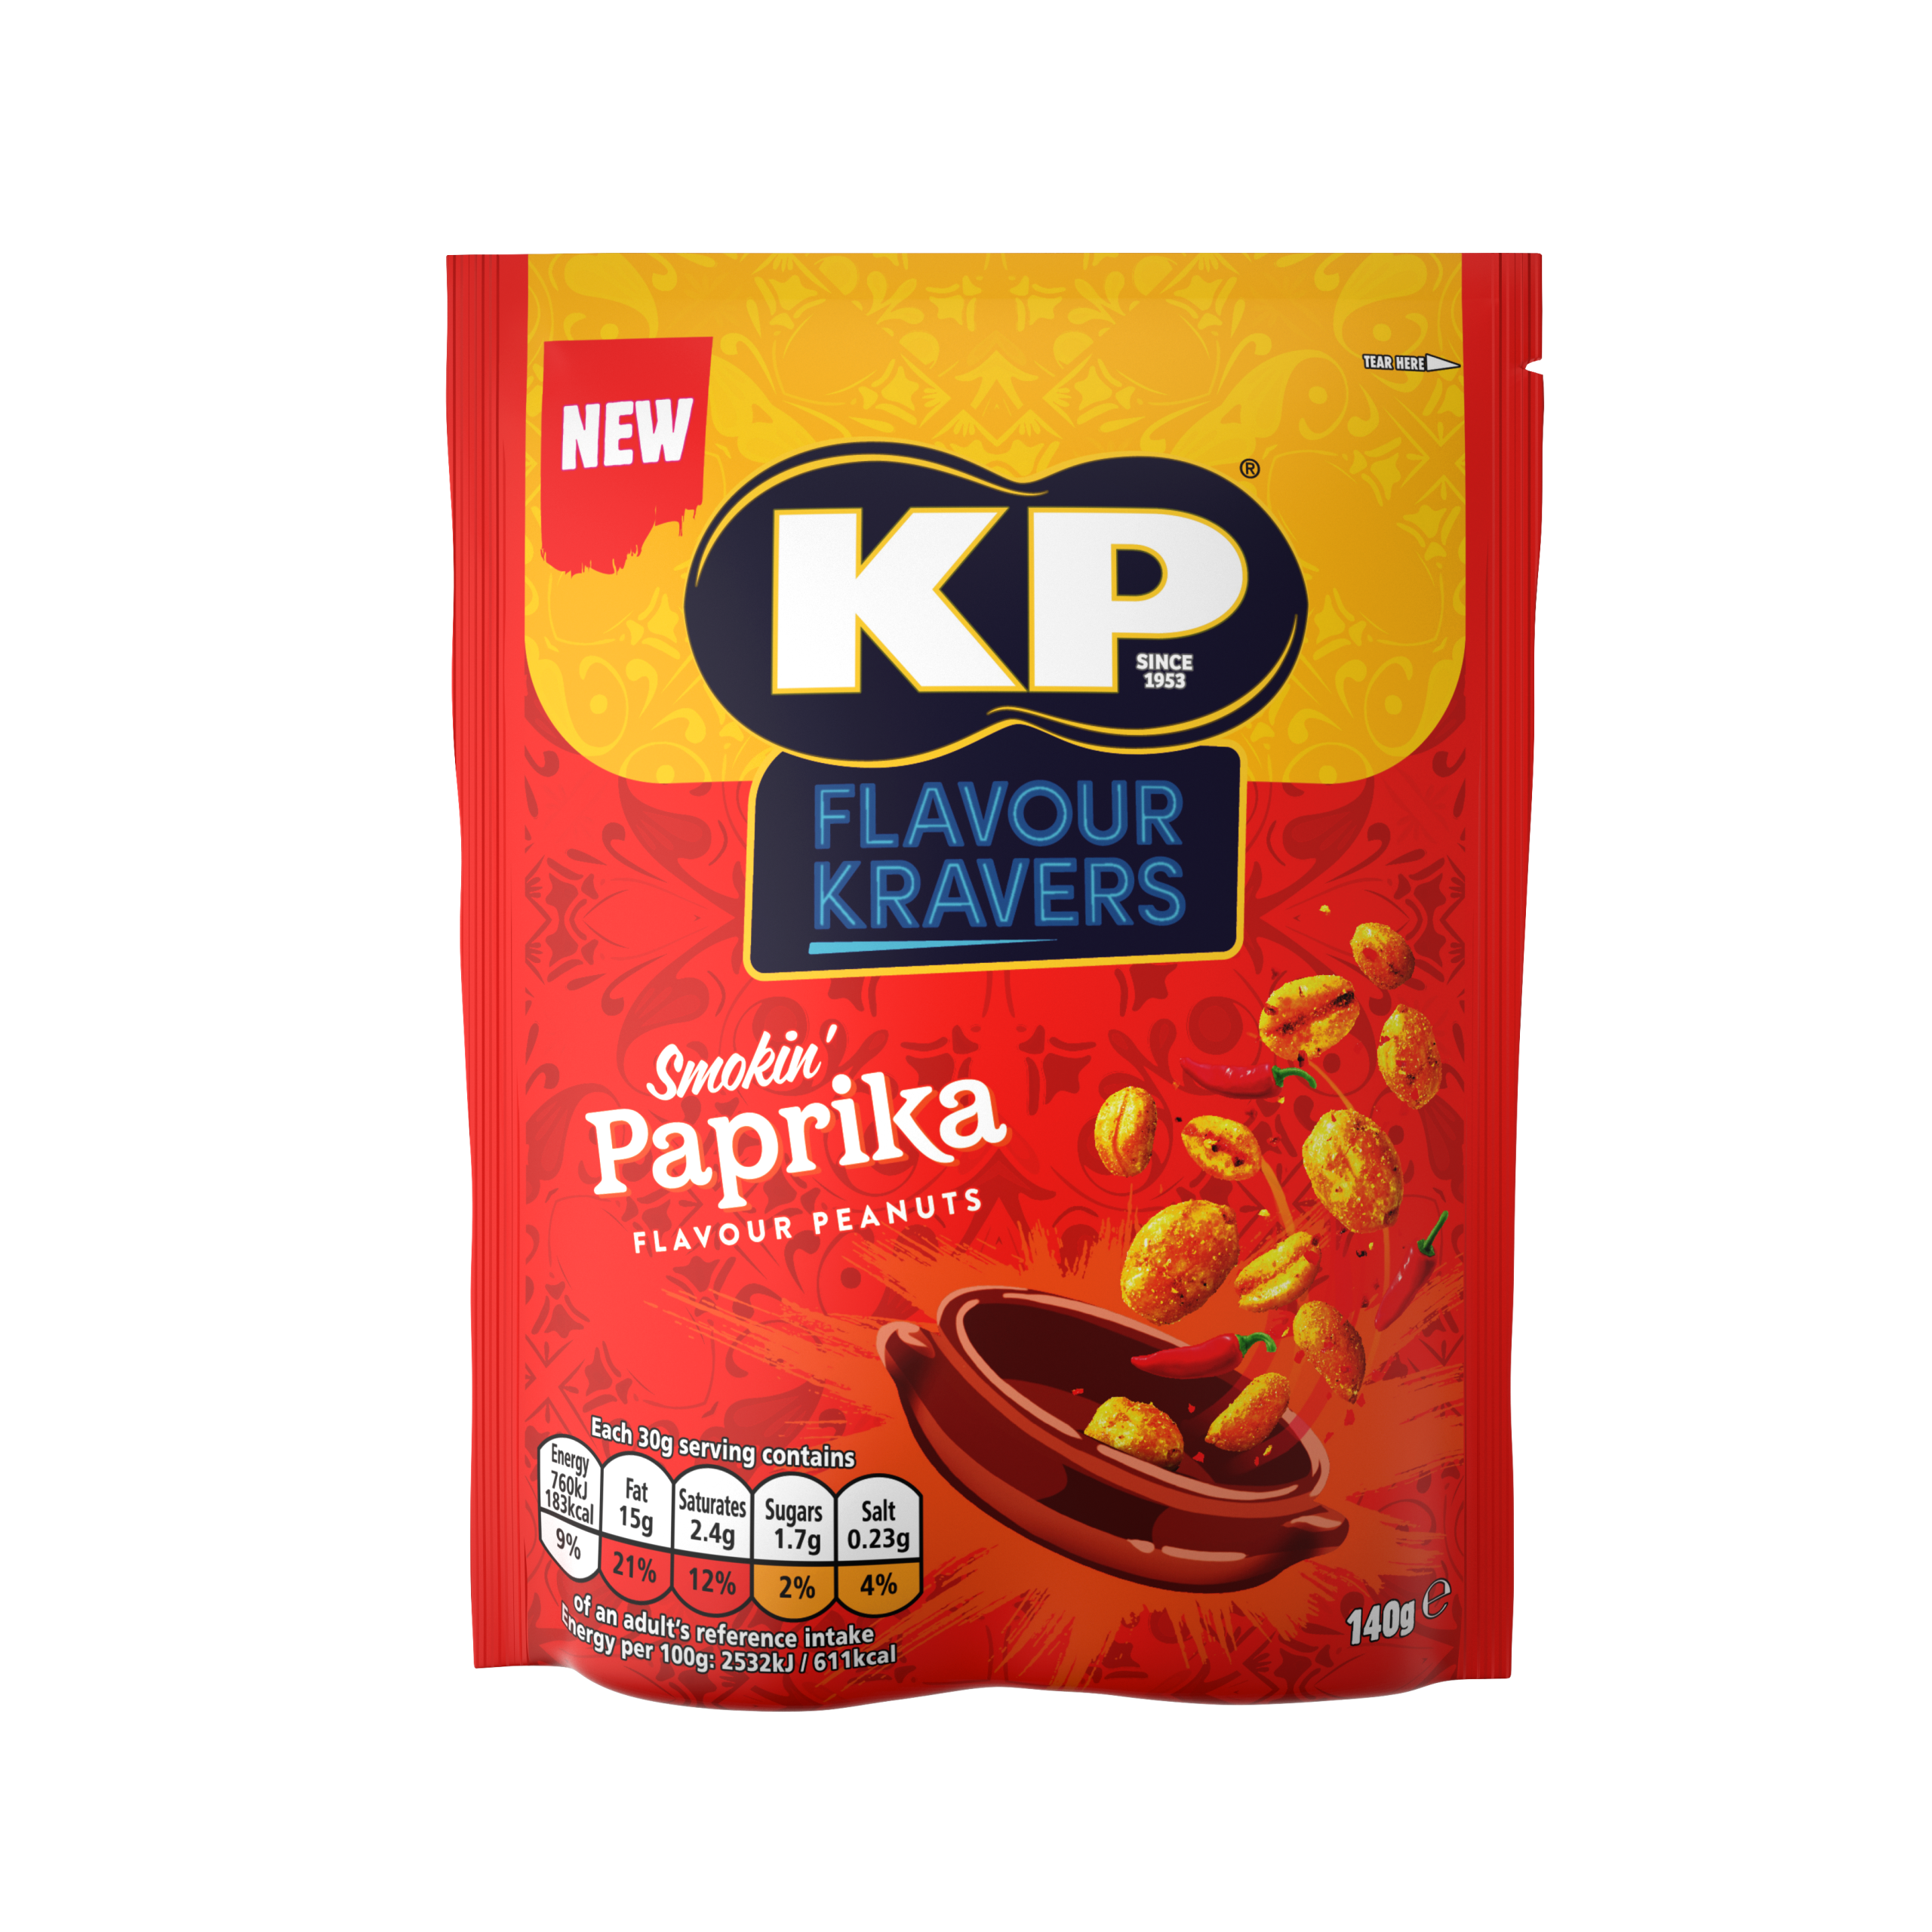 Satisfy your craving with KP Flavour Kravers